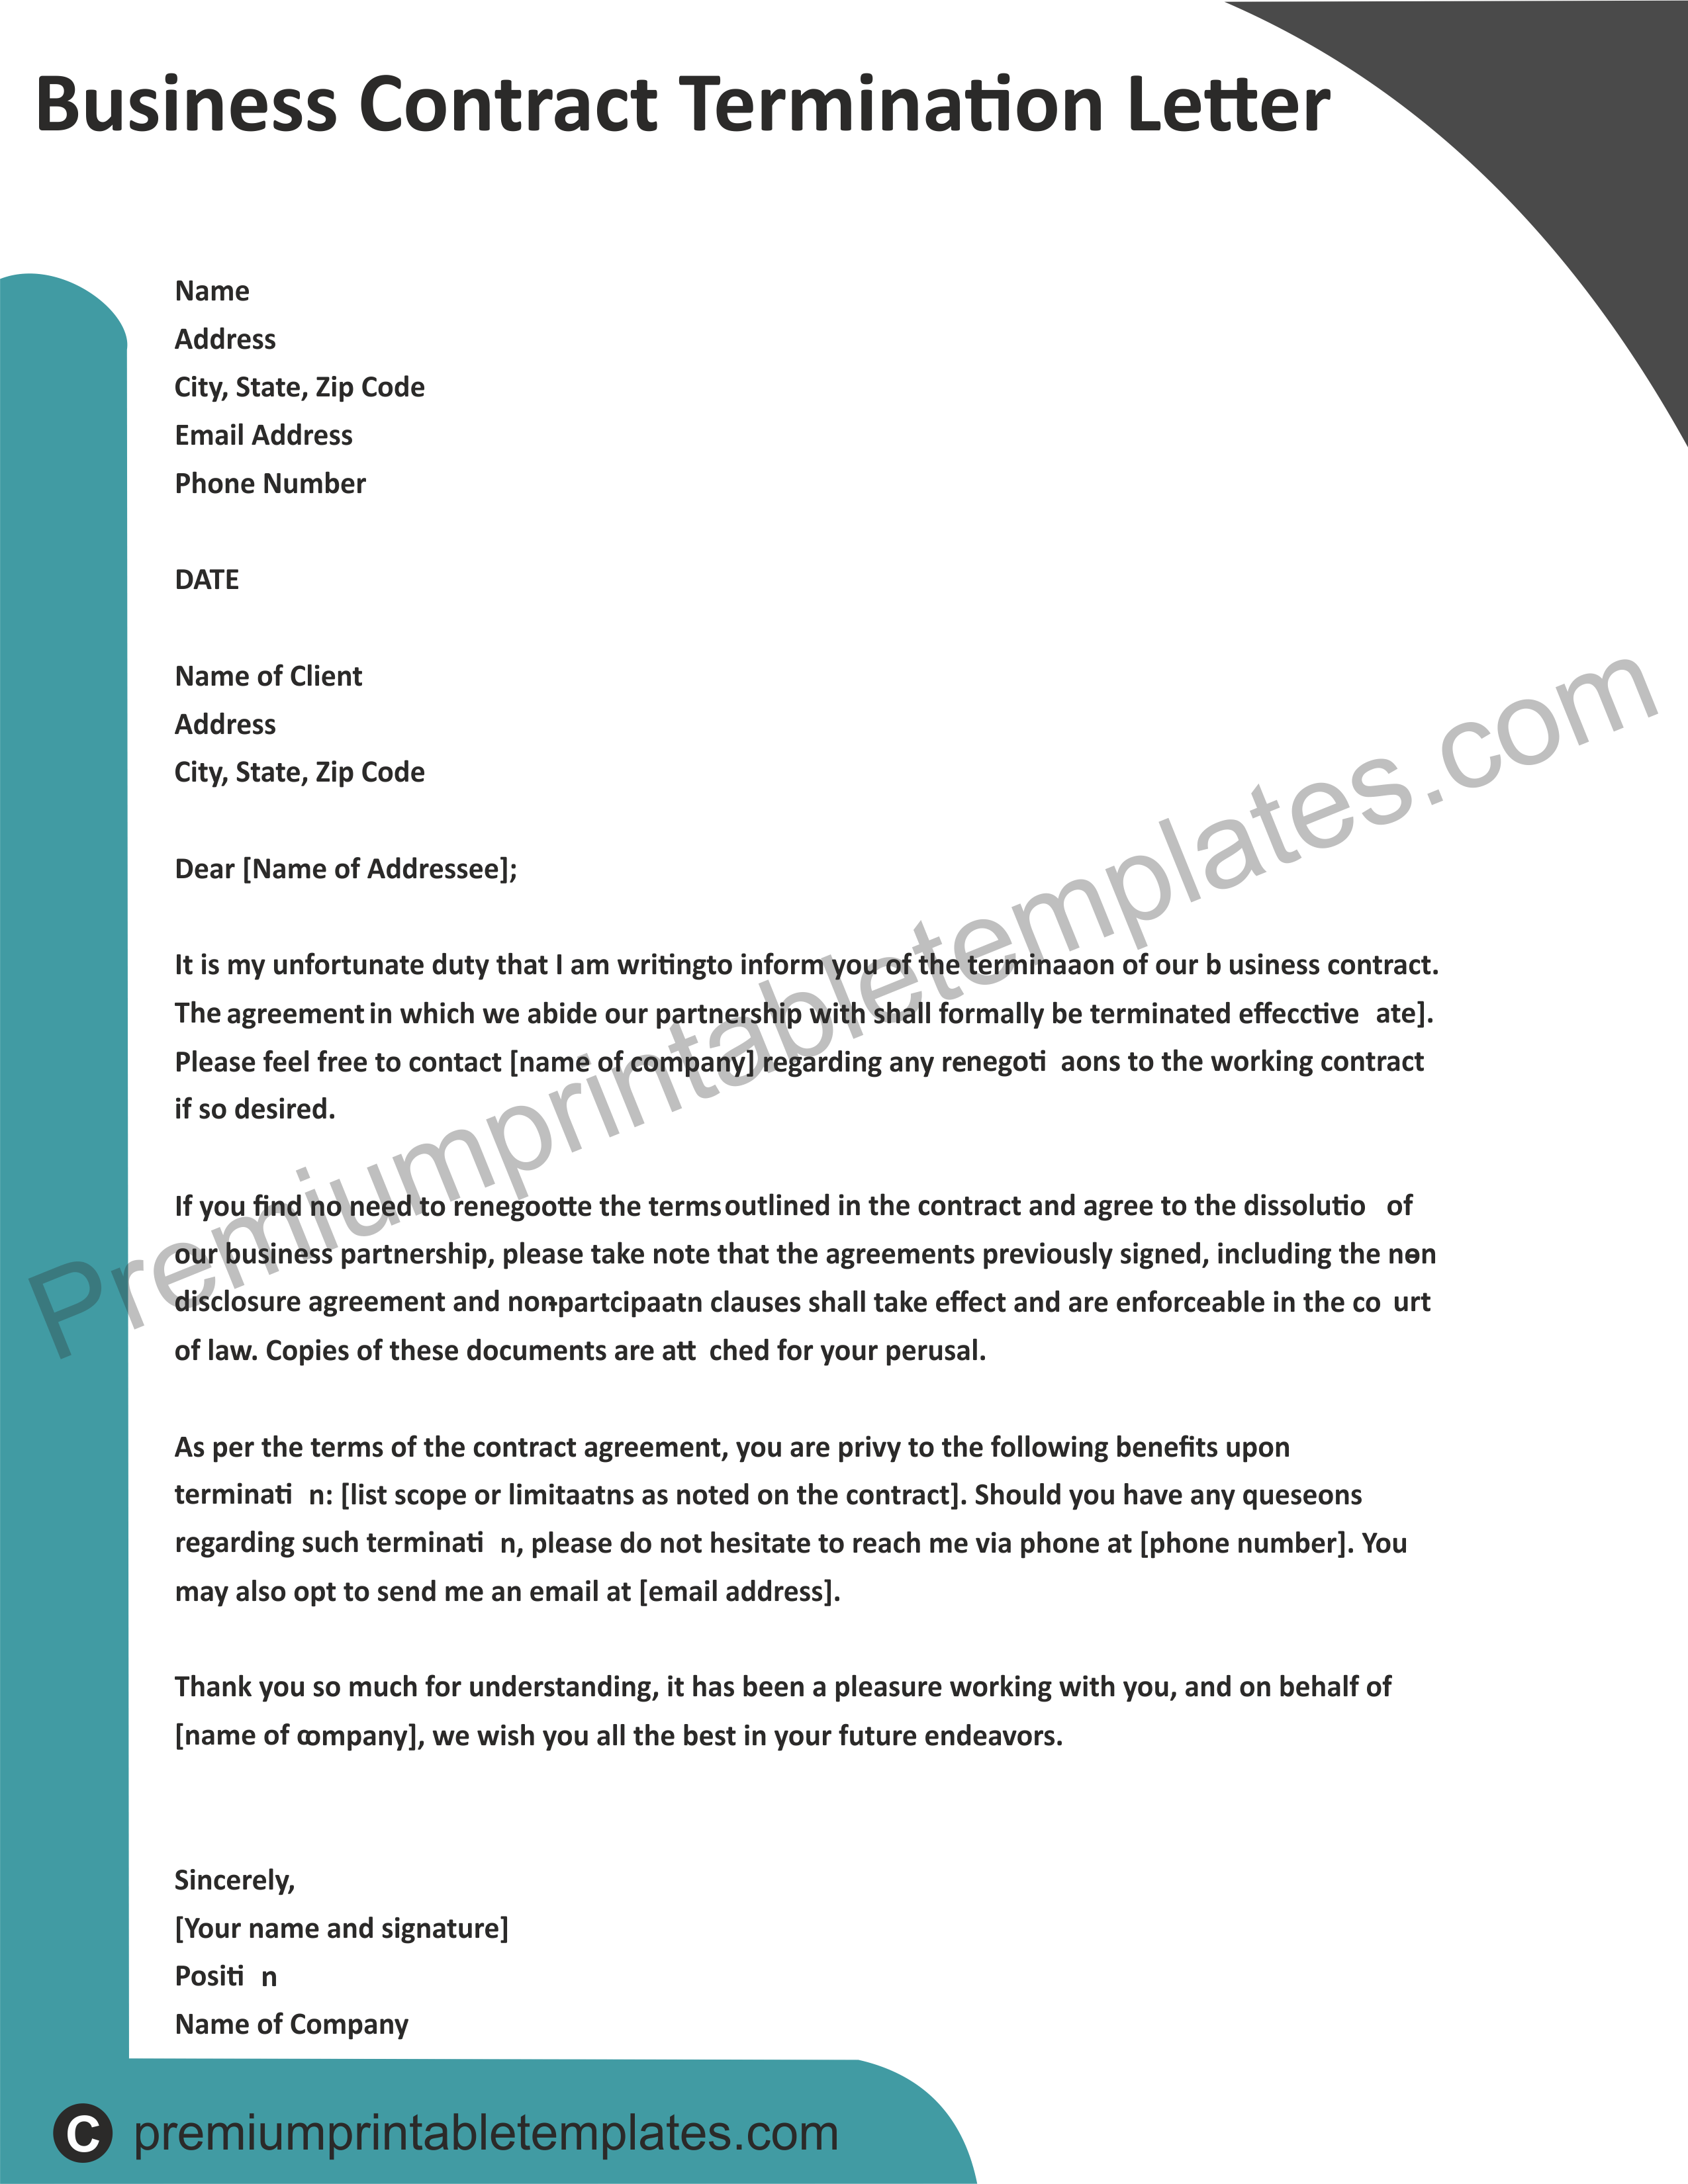 Sample Termination Letter For Misconduct from premiumprintabletemplates.com